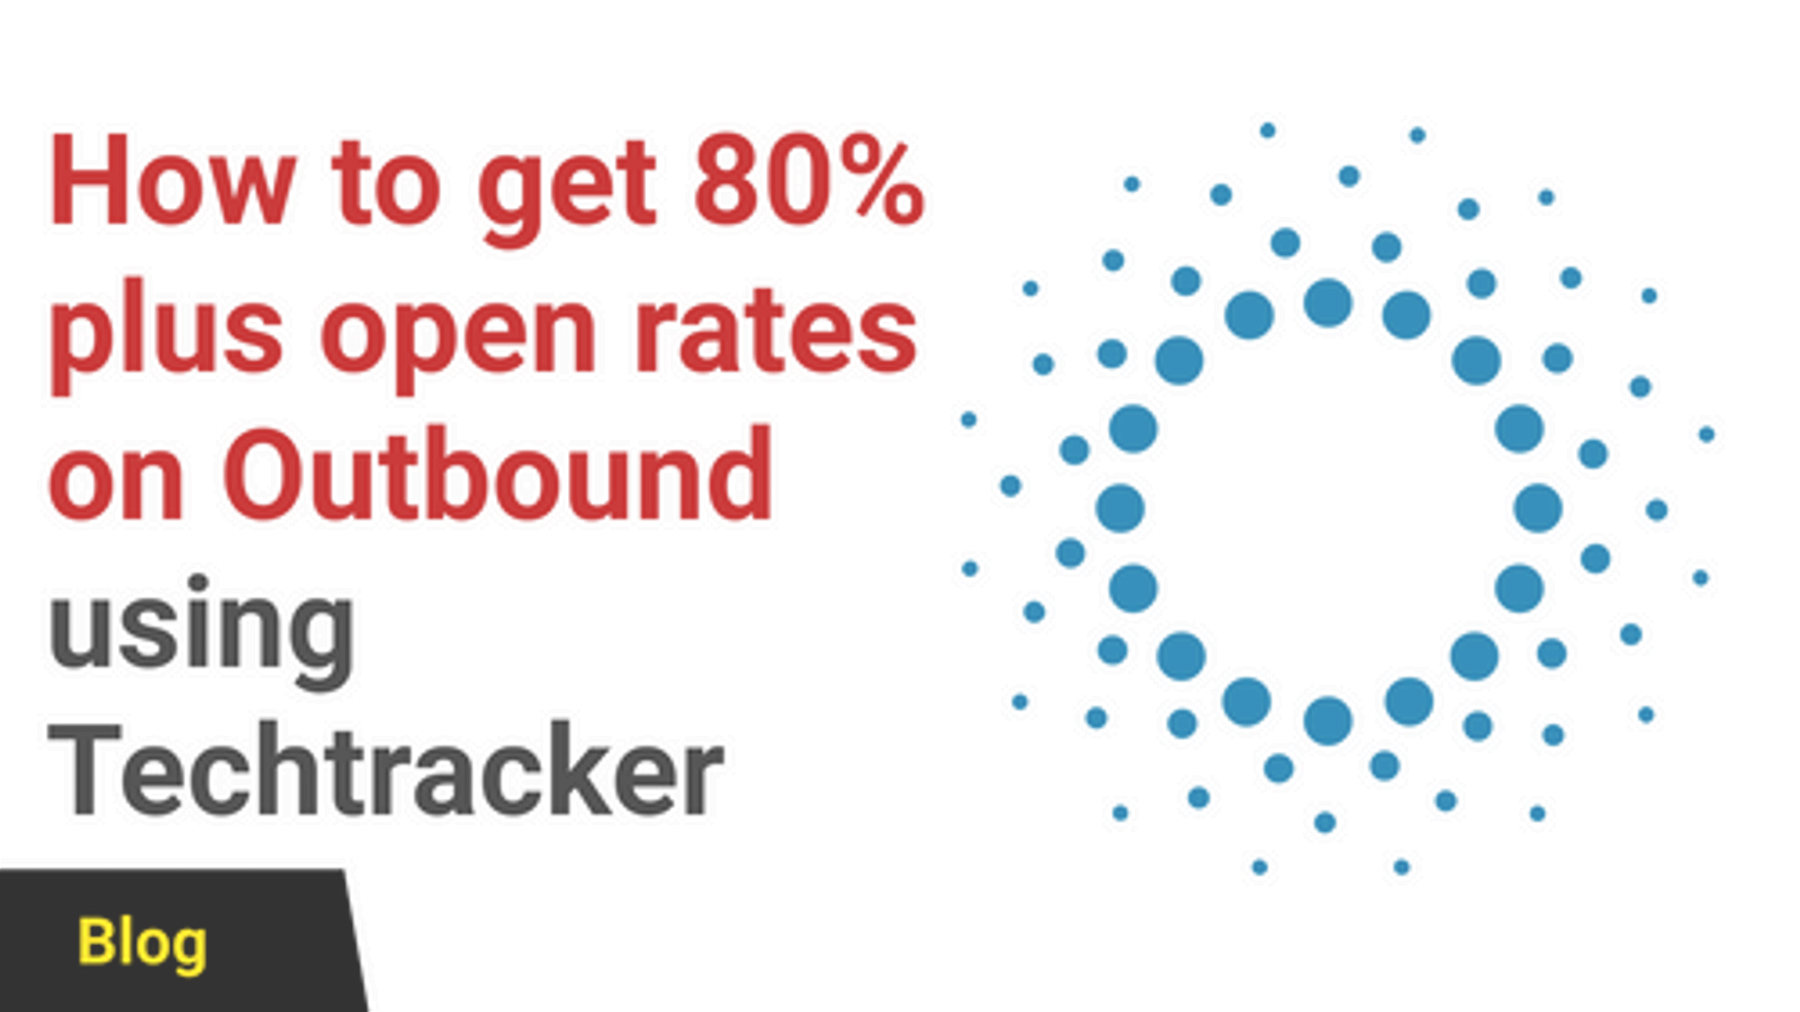 How to get 80% plus open rates on Outbound